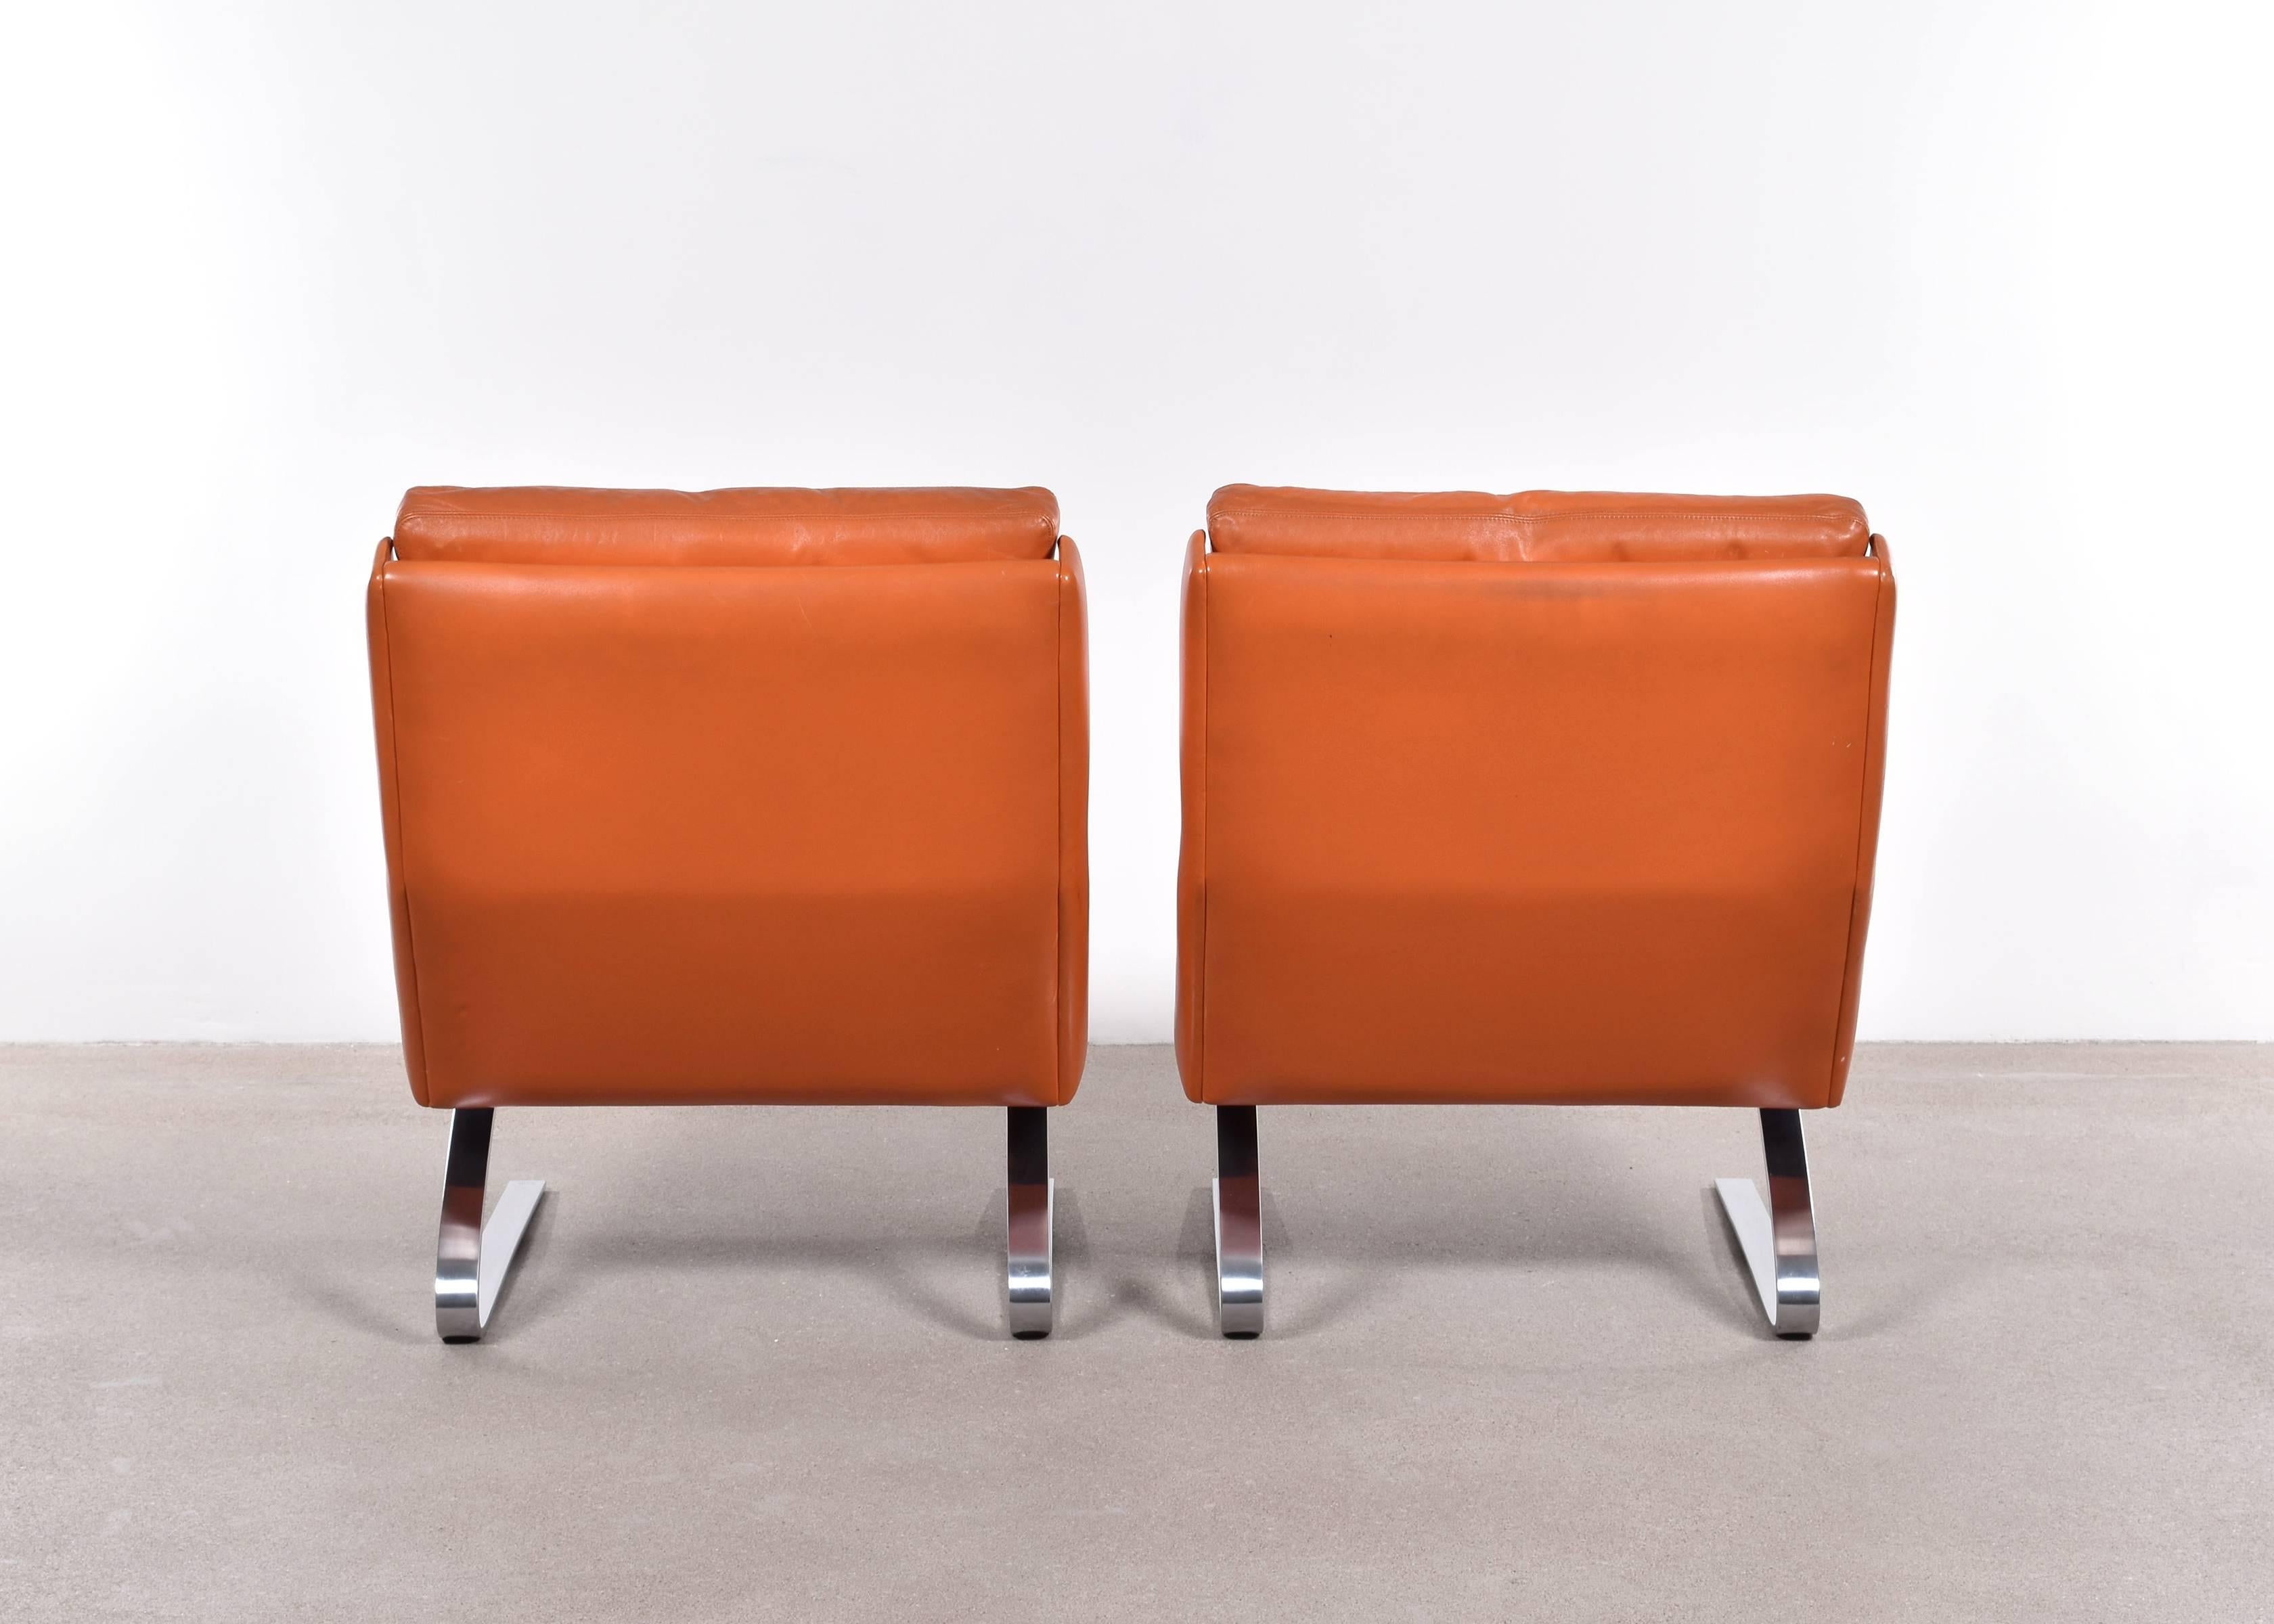 Leather Reinhold Adolf & Hans-Jürgen Schröpfer Lounge Chairs for COR, Germany